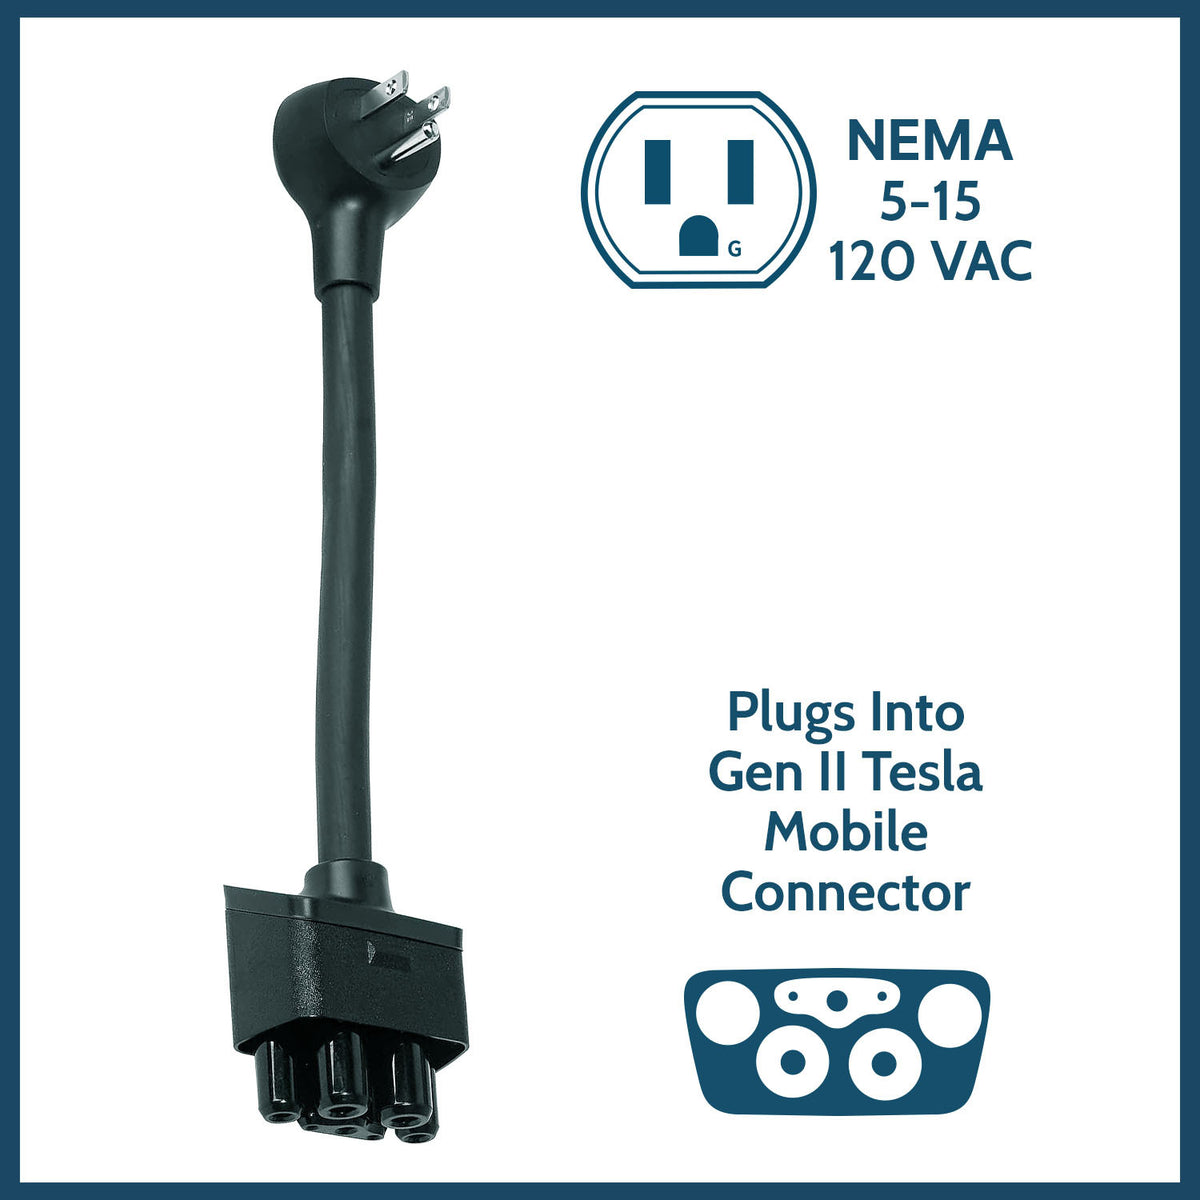 NEMA Adapter Compatible with Tesla Gen 2 Mobile Charger (5-15)